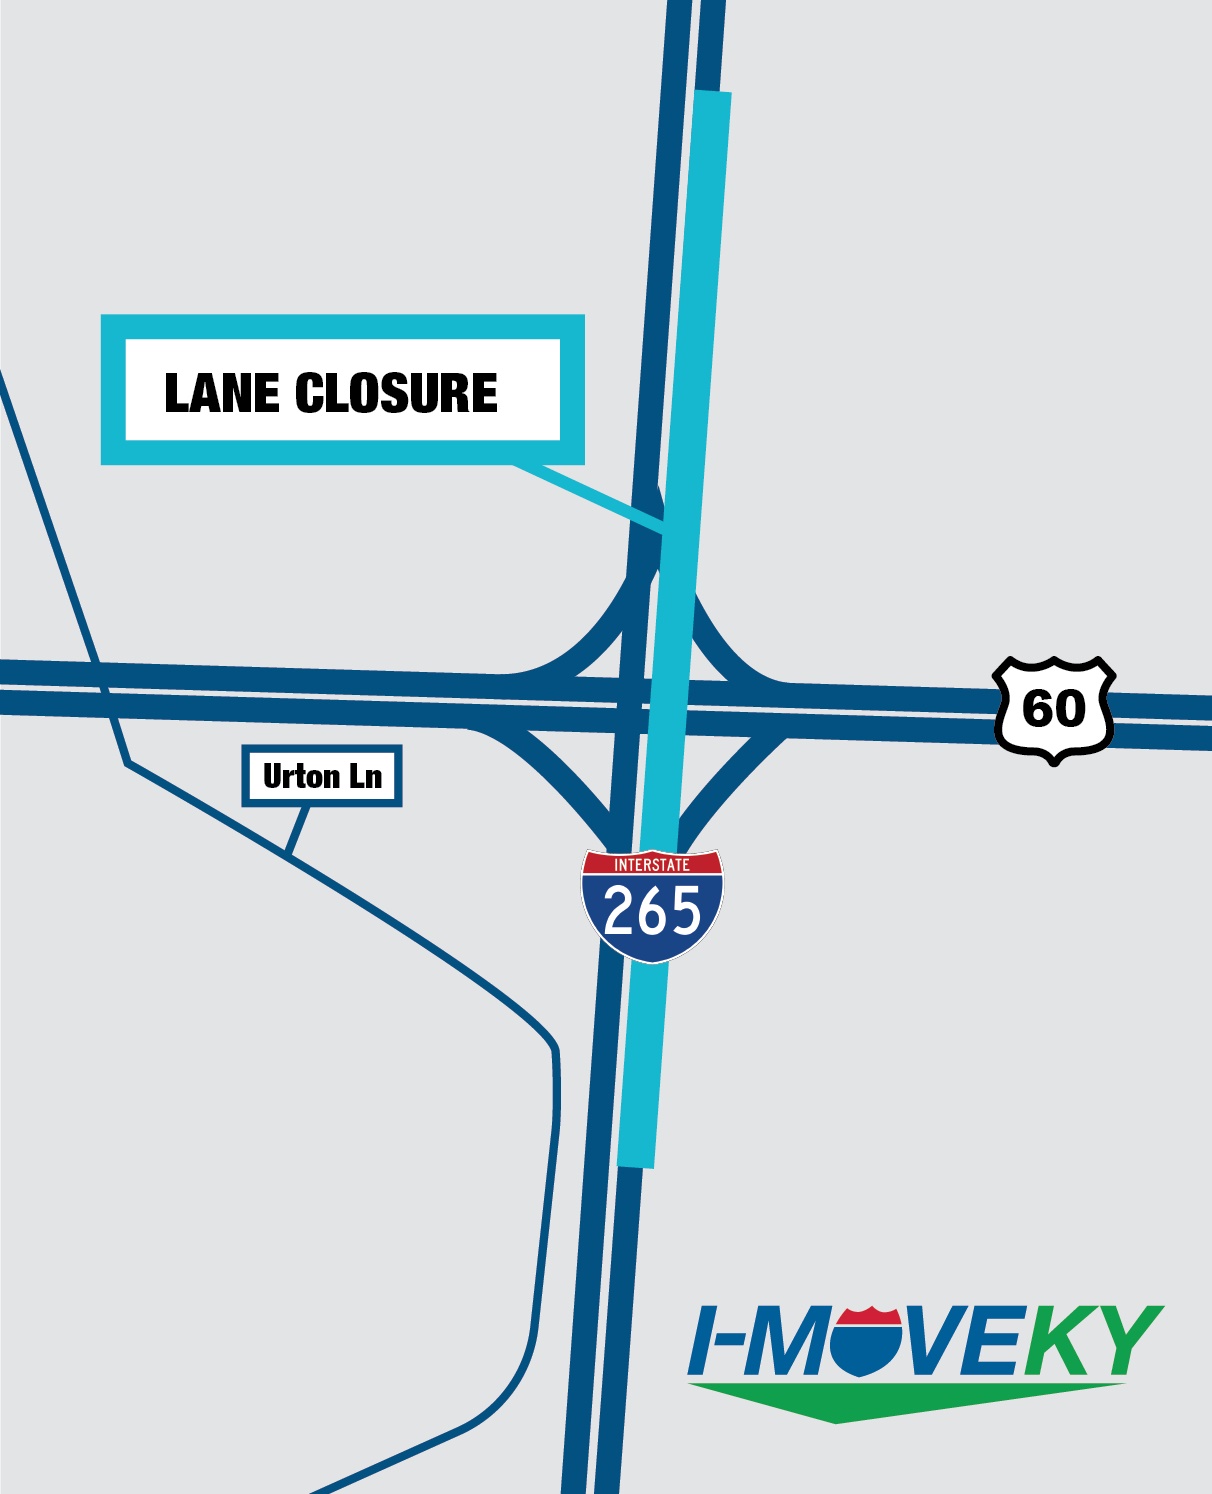 A map of the lane closure. The map background is light gray with navy lines for the highway and roads. The lane closure is in light blue. The green, blue and red I-Move logo is in the bottom right corner.